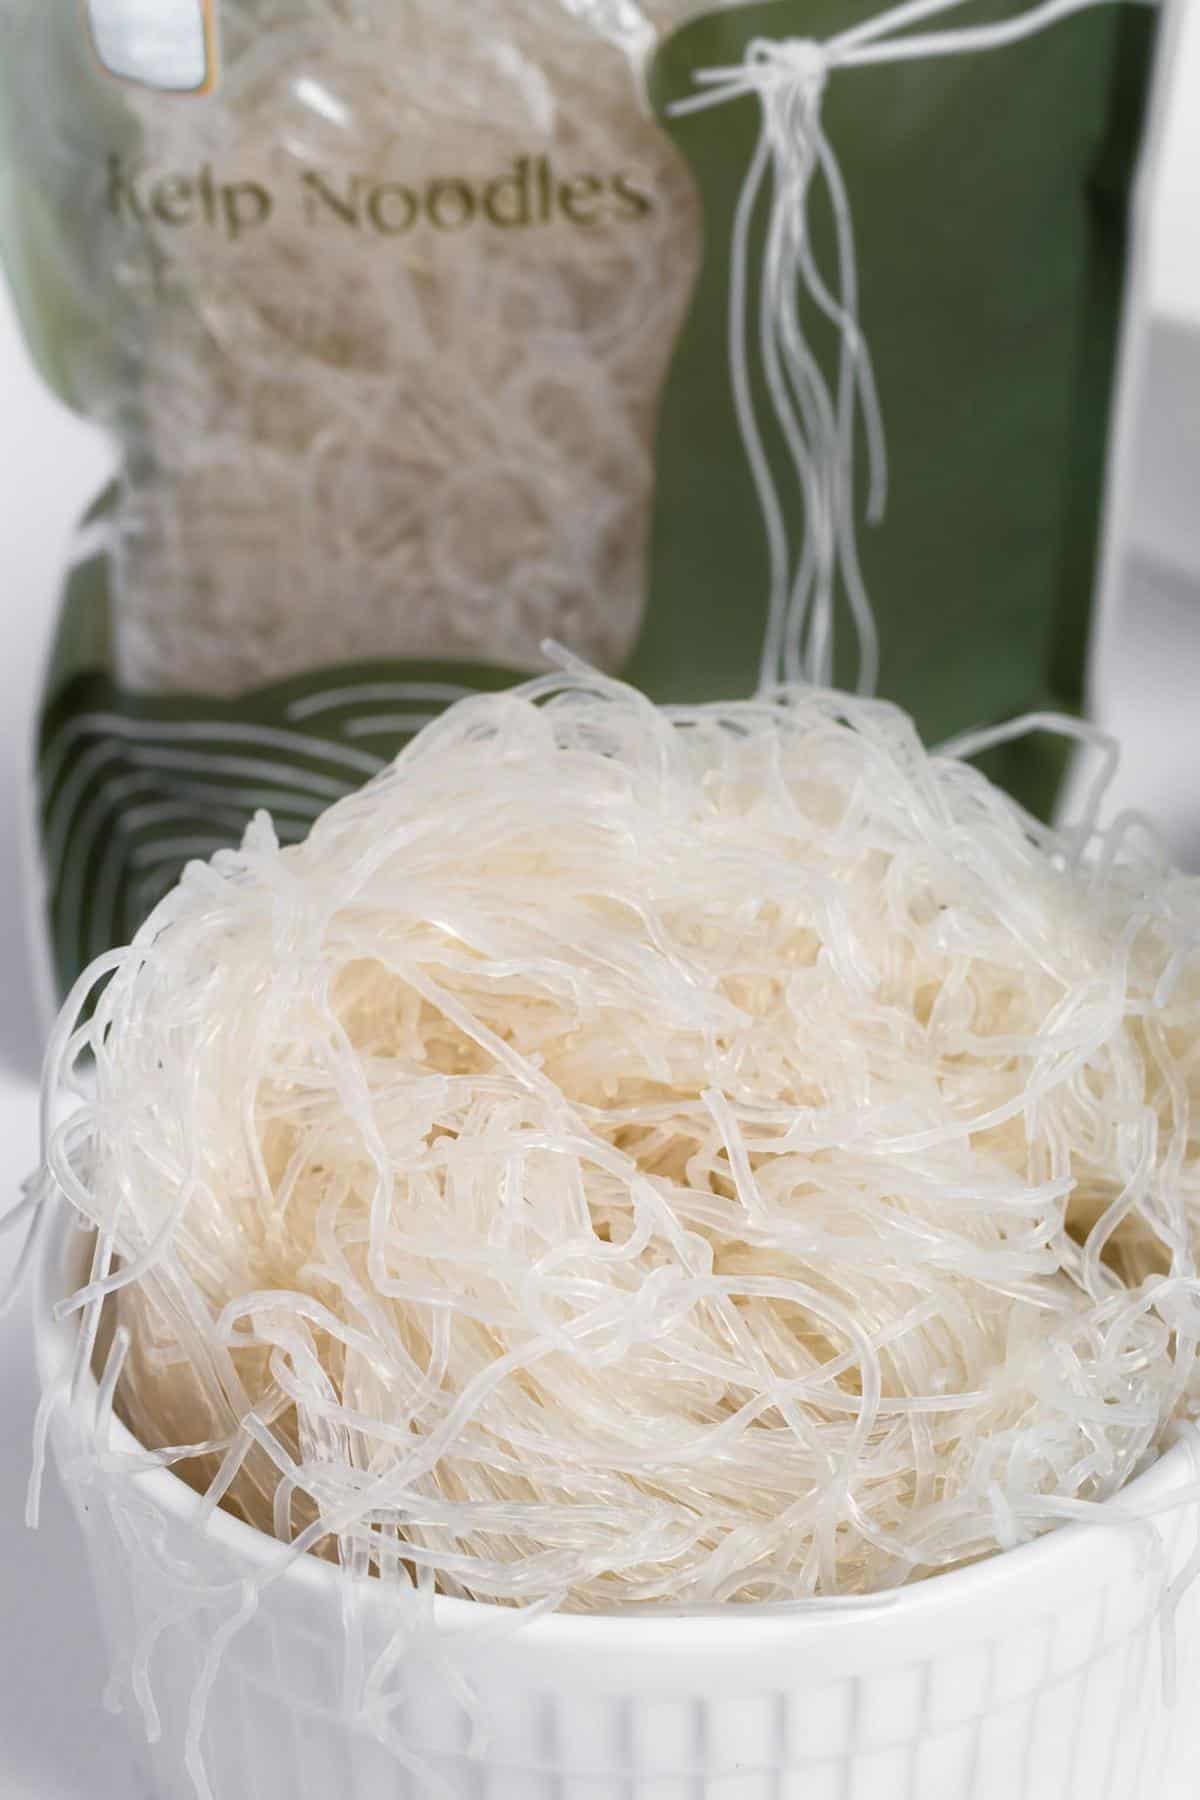 Prepared kelp noodles in a bowl with the packaging behind it.